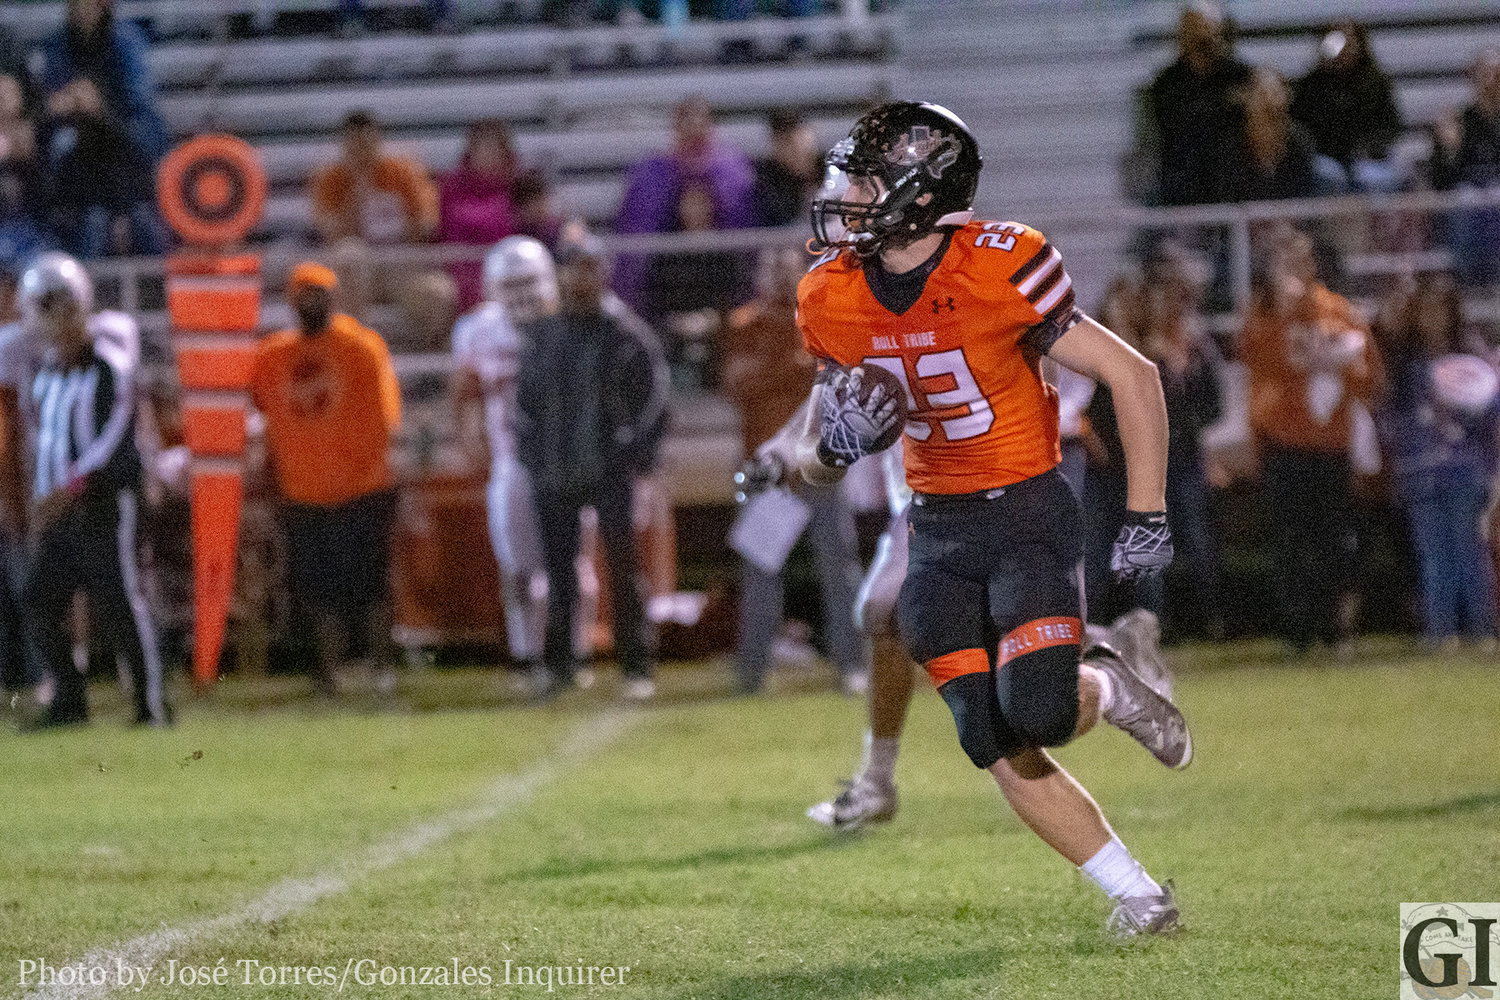 Heath Henke (23) looks for an opening as he returns an interception into Beeville territory in Gonzales' 24-13 victory. Henke would end the night with two interceptions.